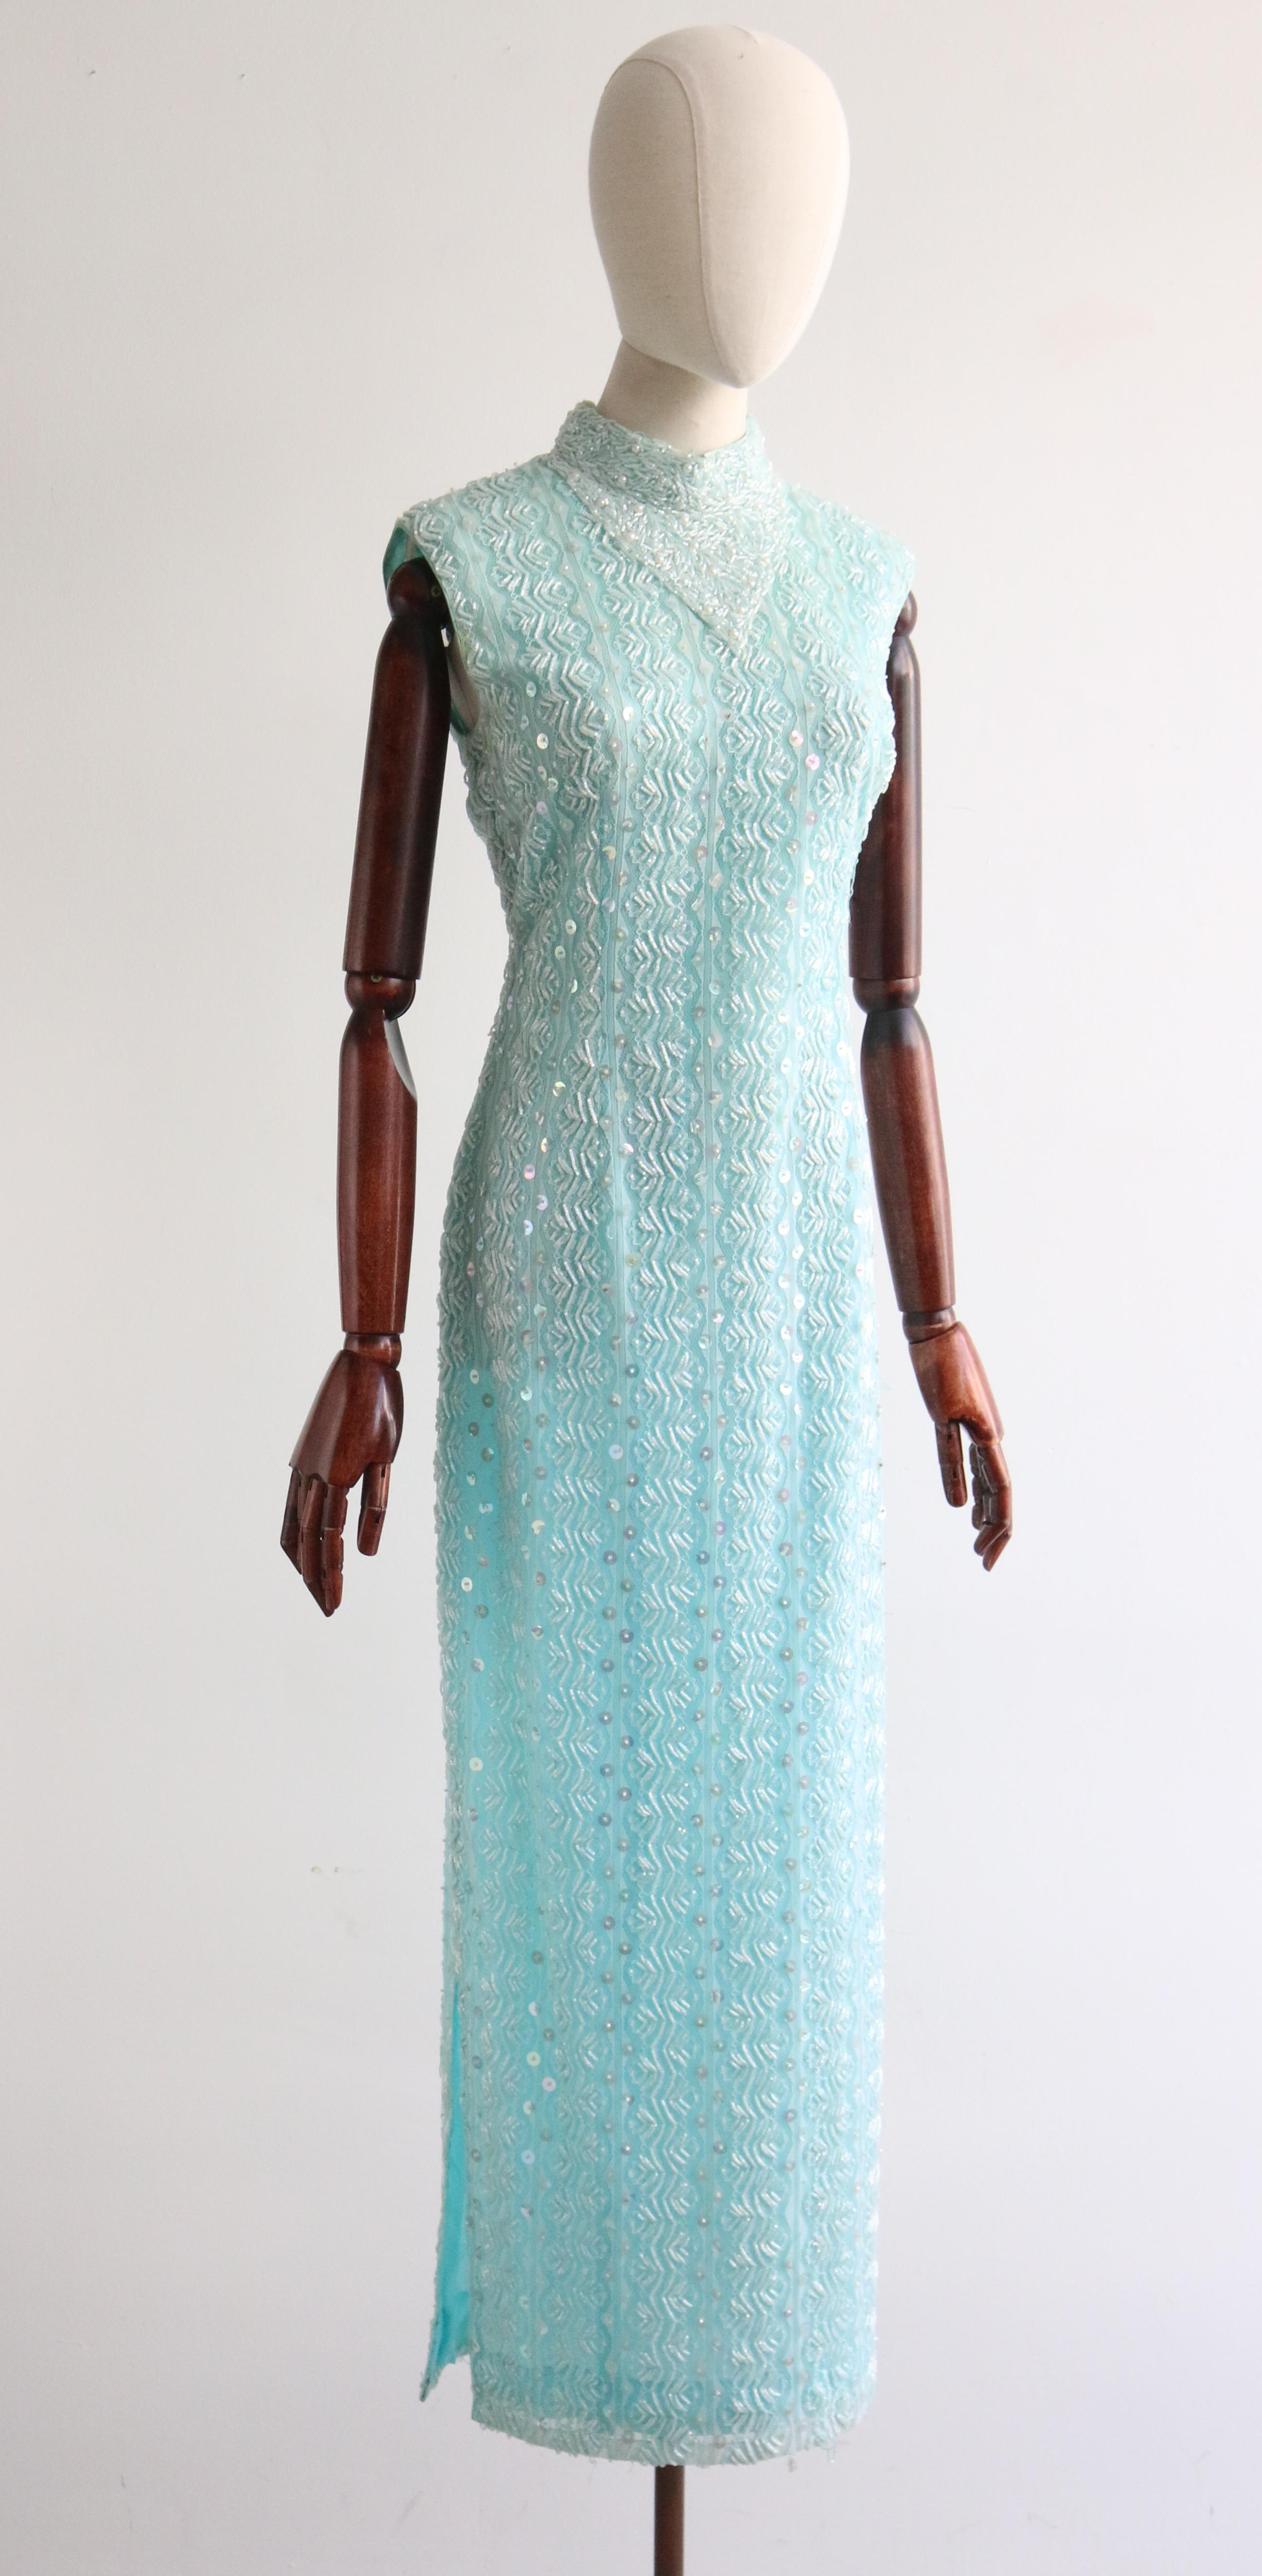 Vintage 1960's Aqua Beaded Lace Dress UK 10-12 US 6-8 In Good Condition For Sale In Cheltenham, GB